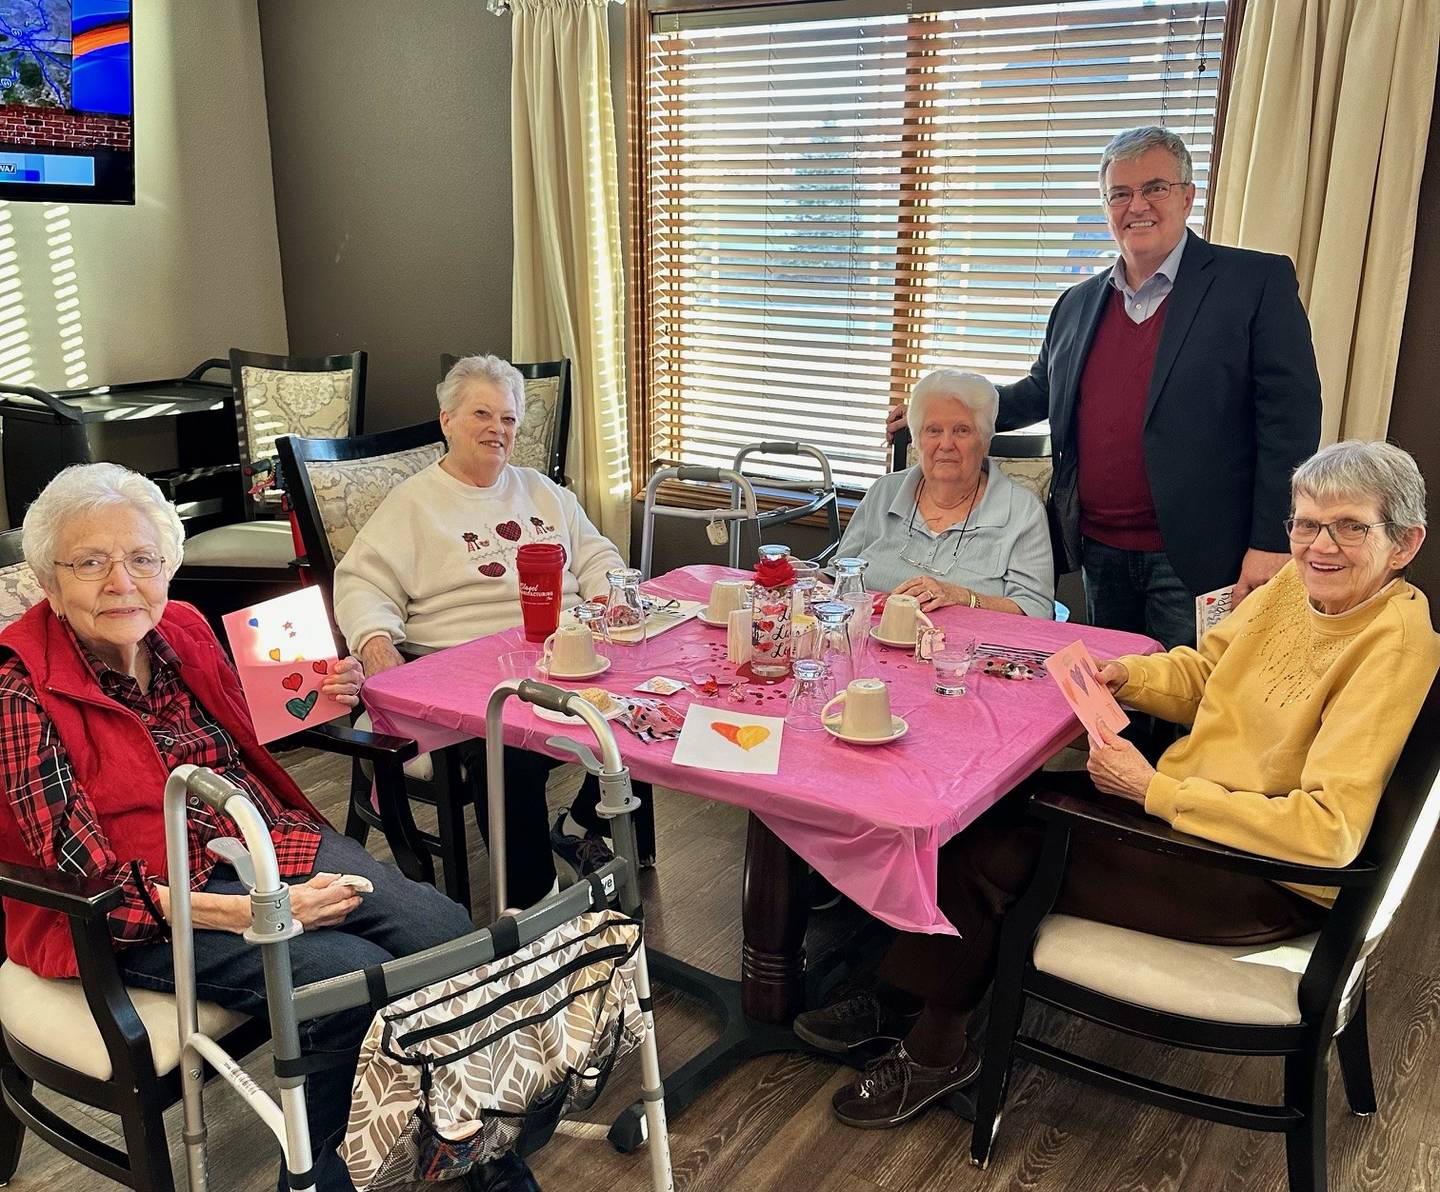 State Sen. Tom Bennett, R-Gibson City, traveled across his district to ensure the senior citizens in his district felt loved and remembered for Valentine’s Day.